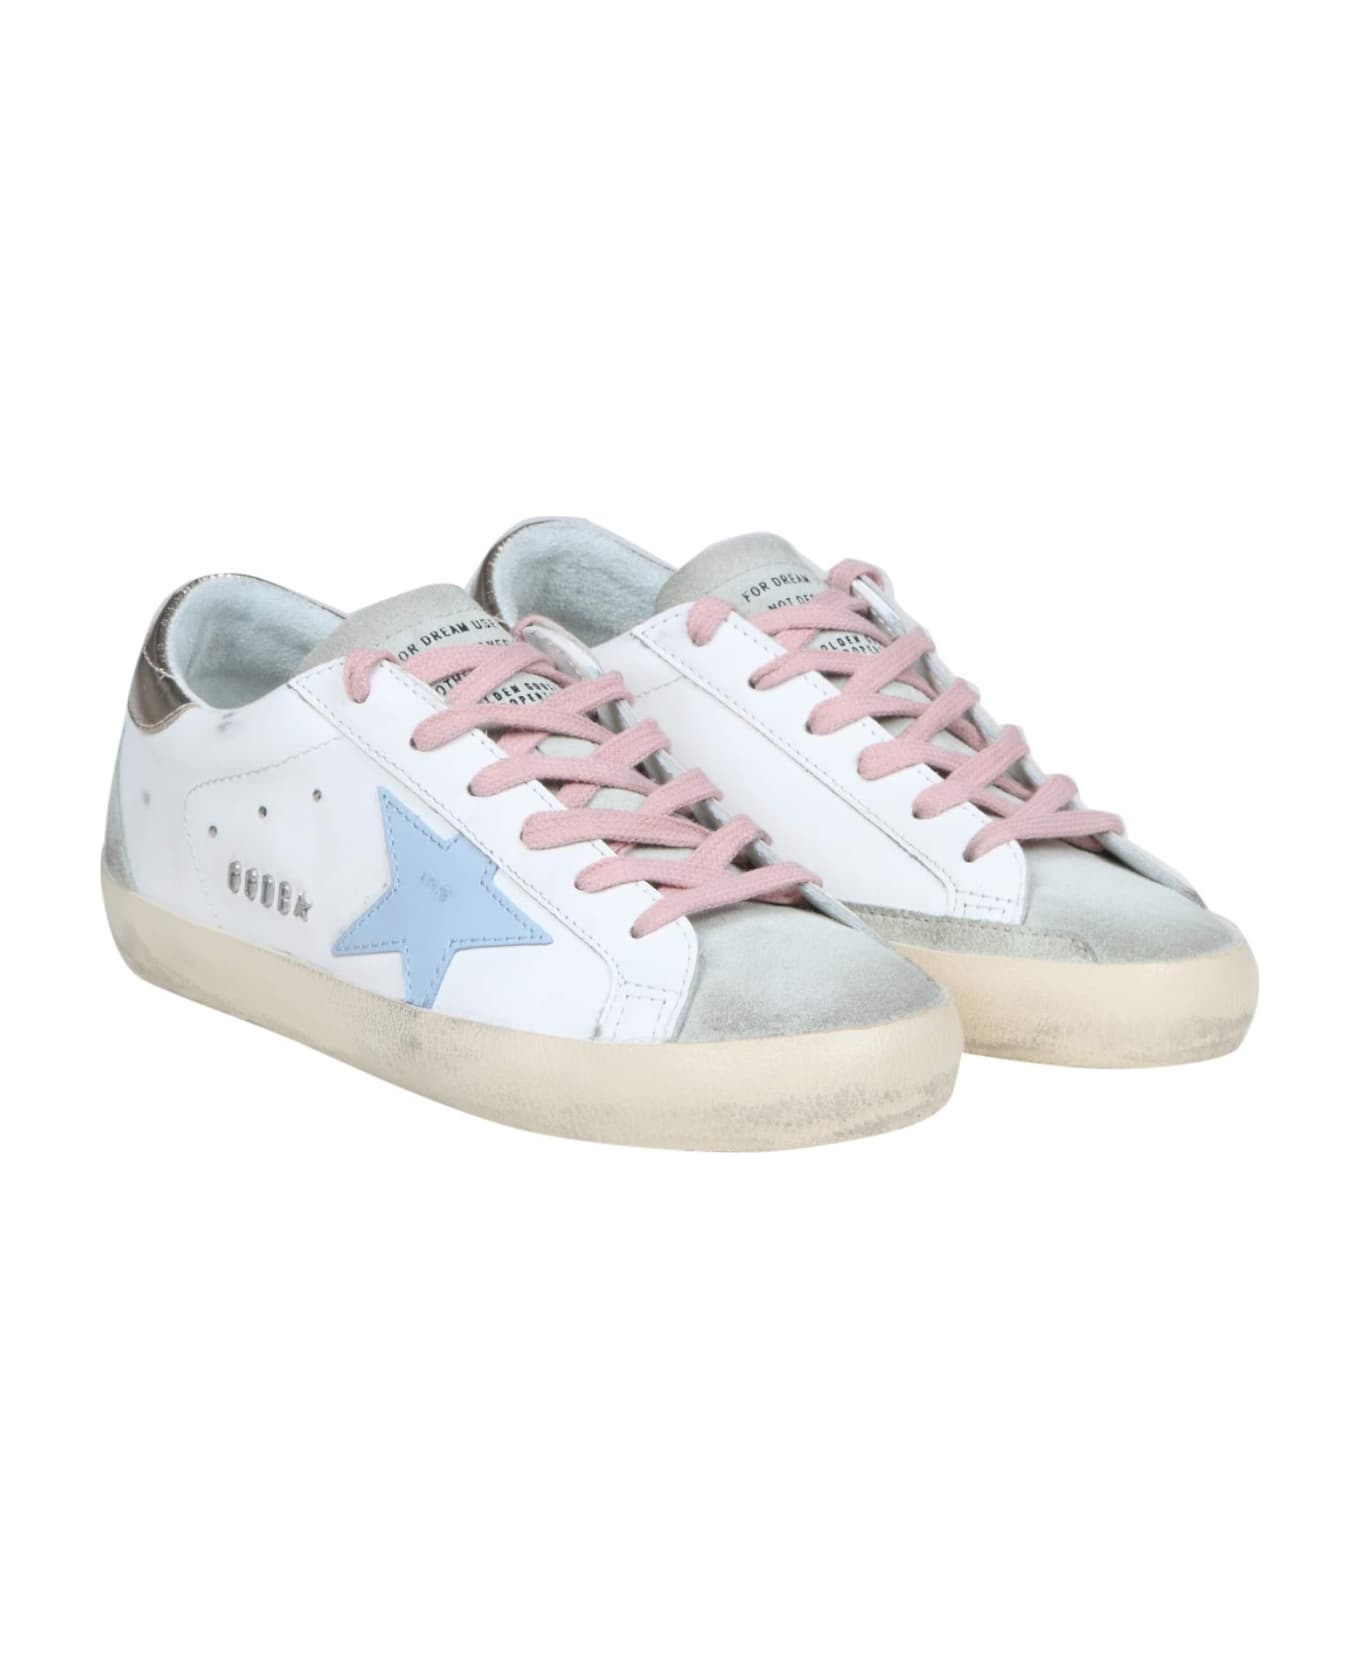 Golden Goose Super Star Sneakers In White Leather - White/Platinum